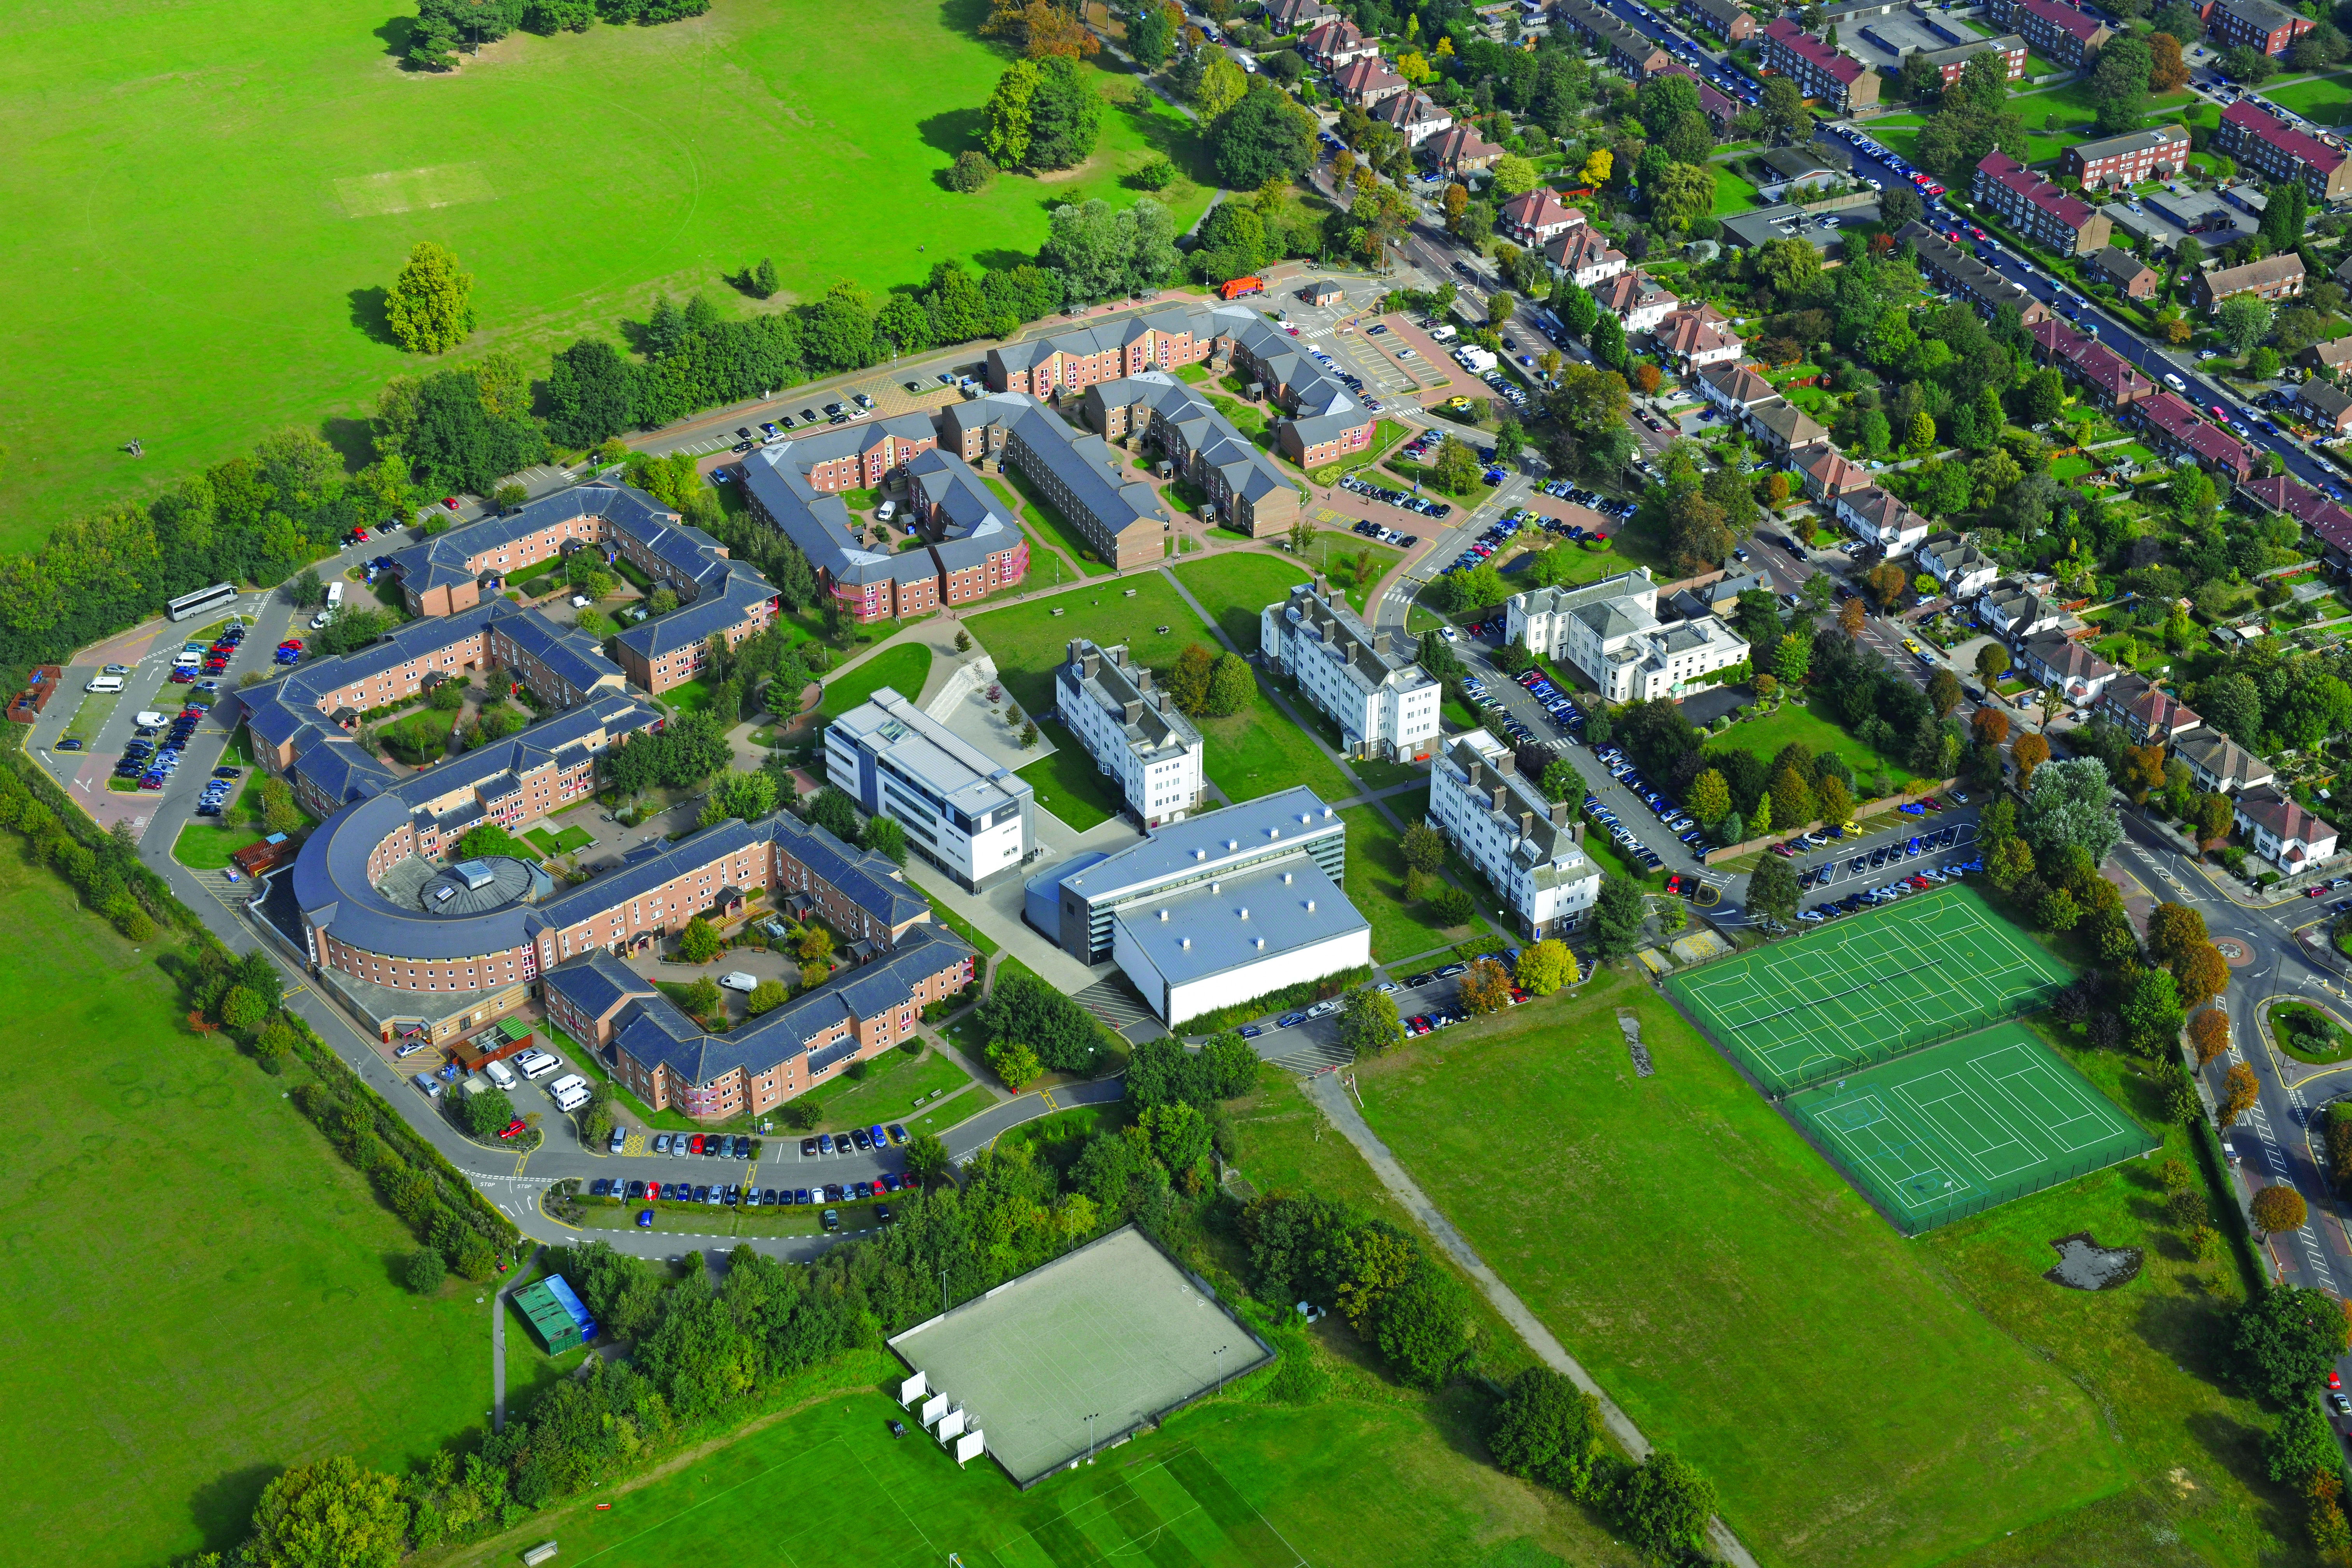 University ​ of ​ Greenwich Avery Hill ​ campus view from above